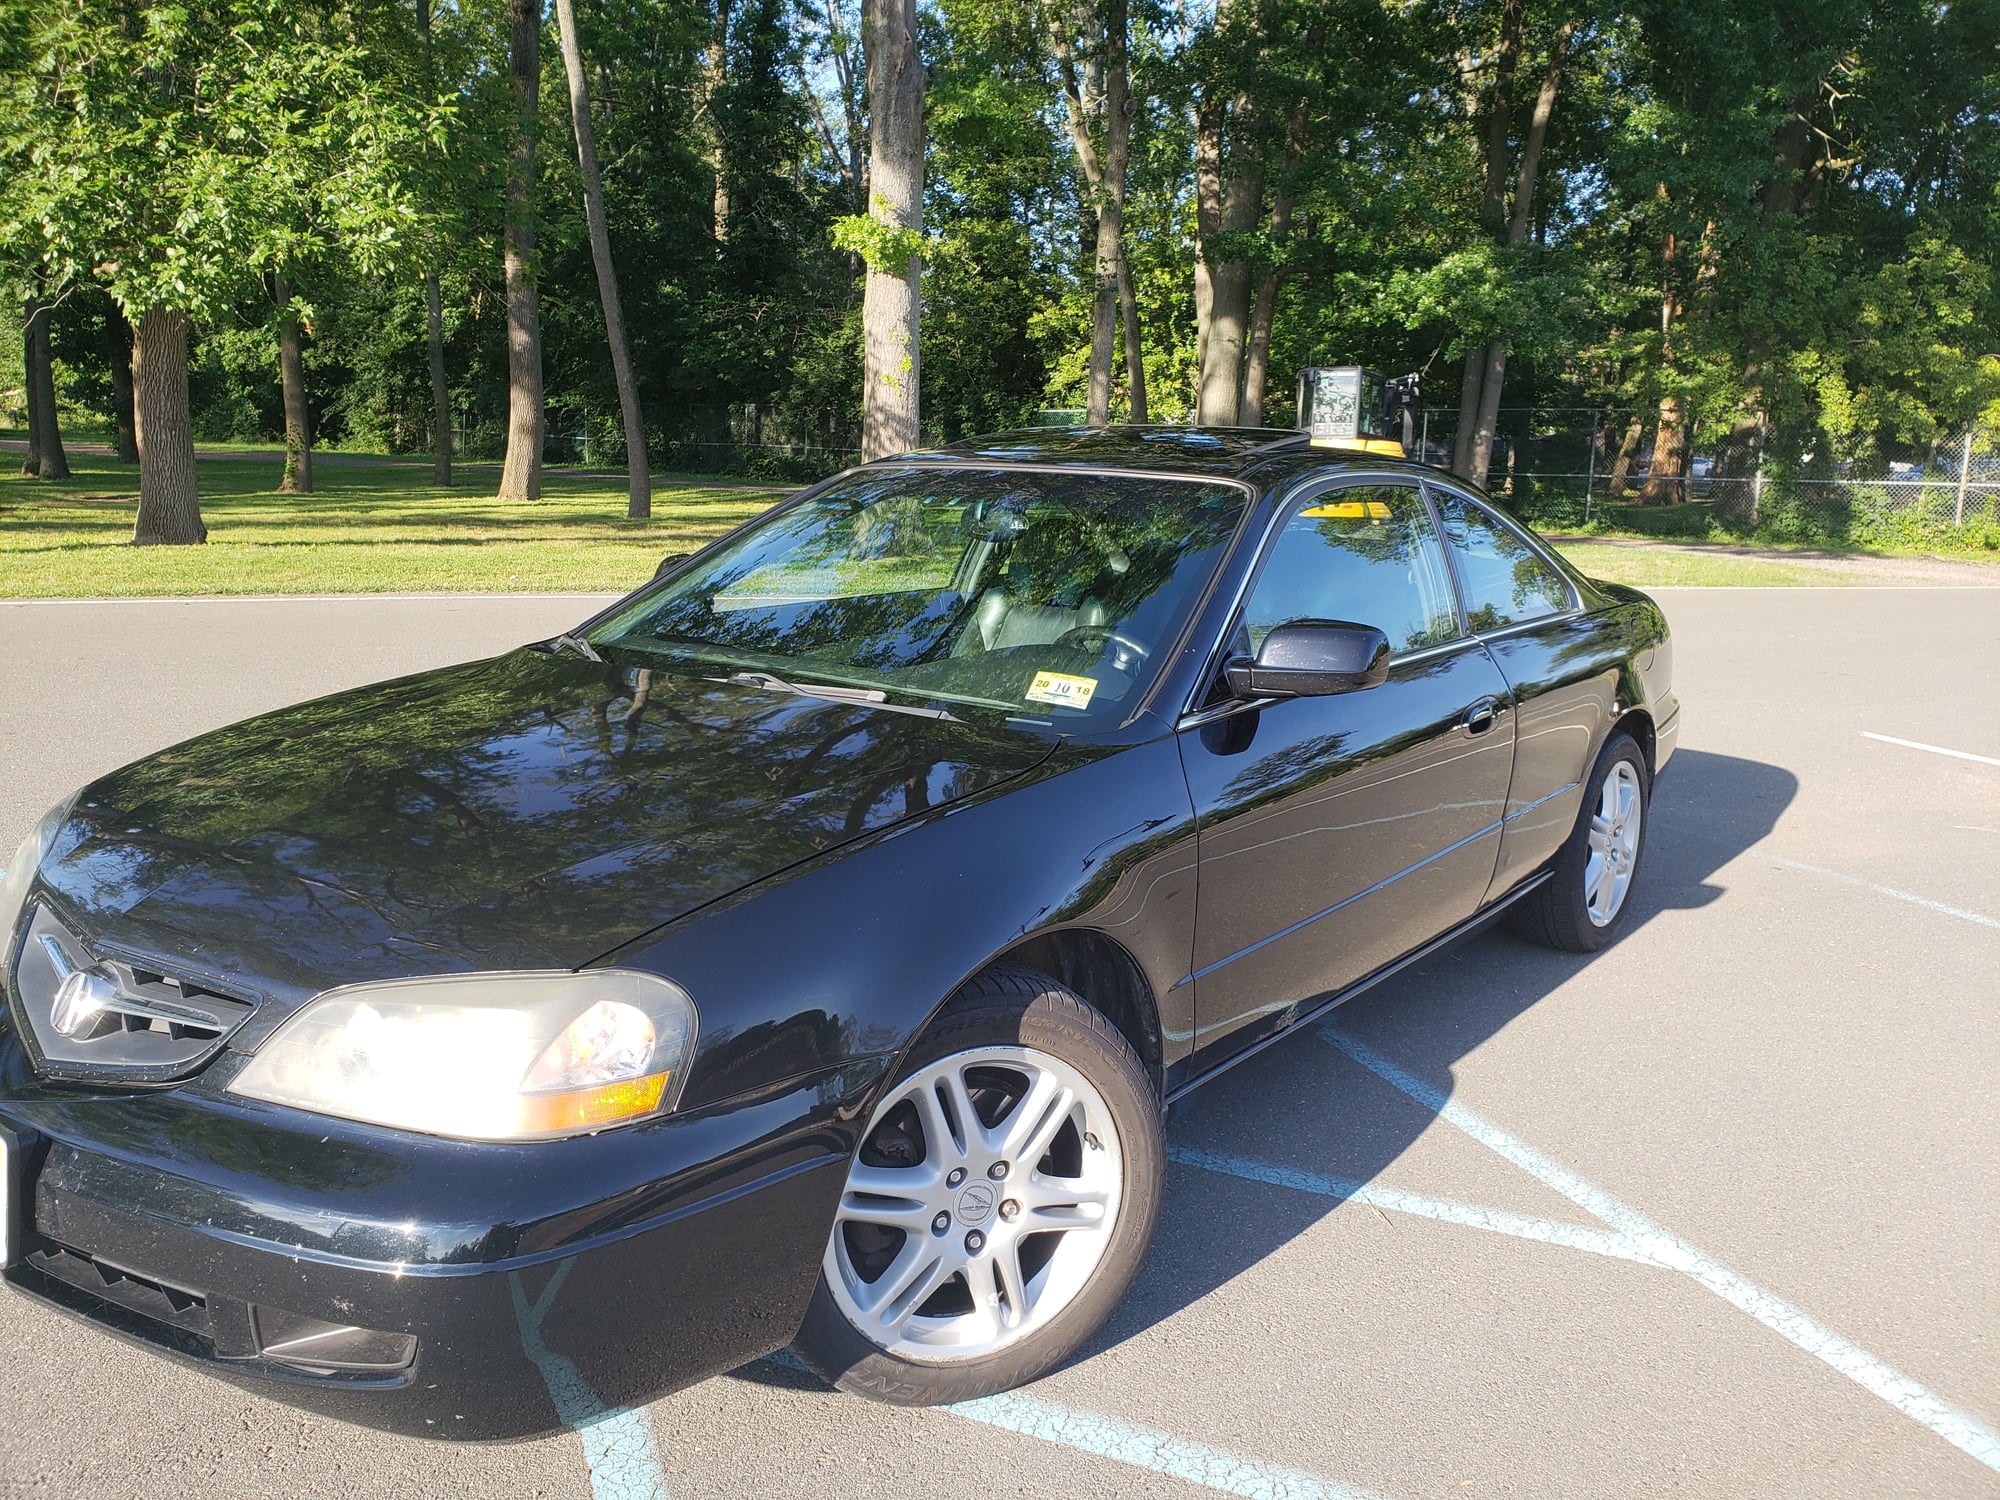 2003 Acura CL - FS: 2003 Acura CL Type-S AT-5 192k miles - Used - VIN 19uya42663a009178 - 192,000 Miles - 6 cyl - 2WD - Automatic - Coupe - Black - Highland Park, NJ 08904, United States